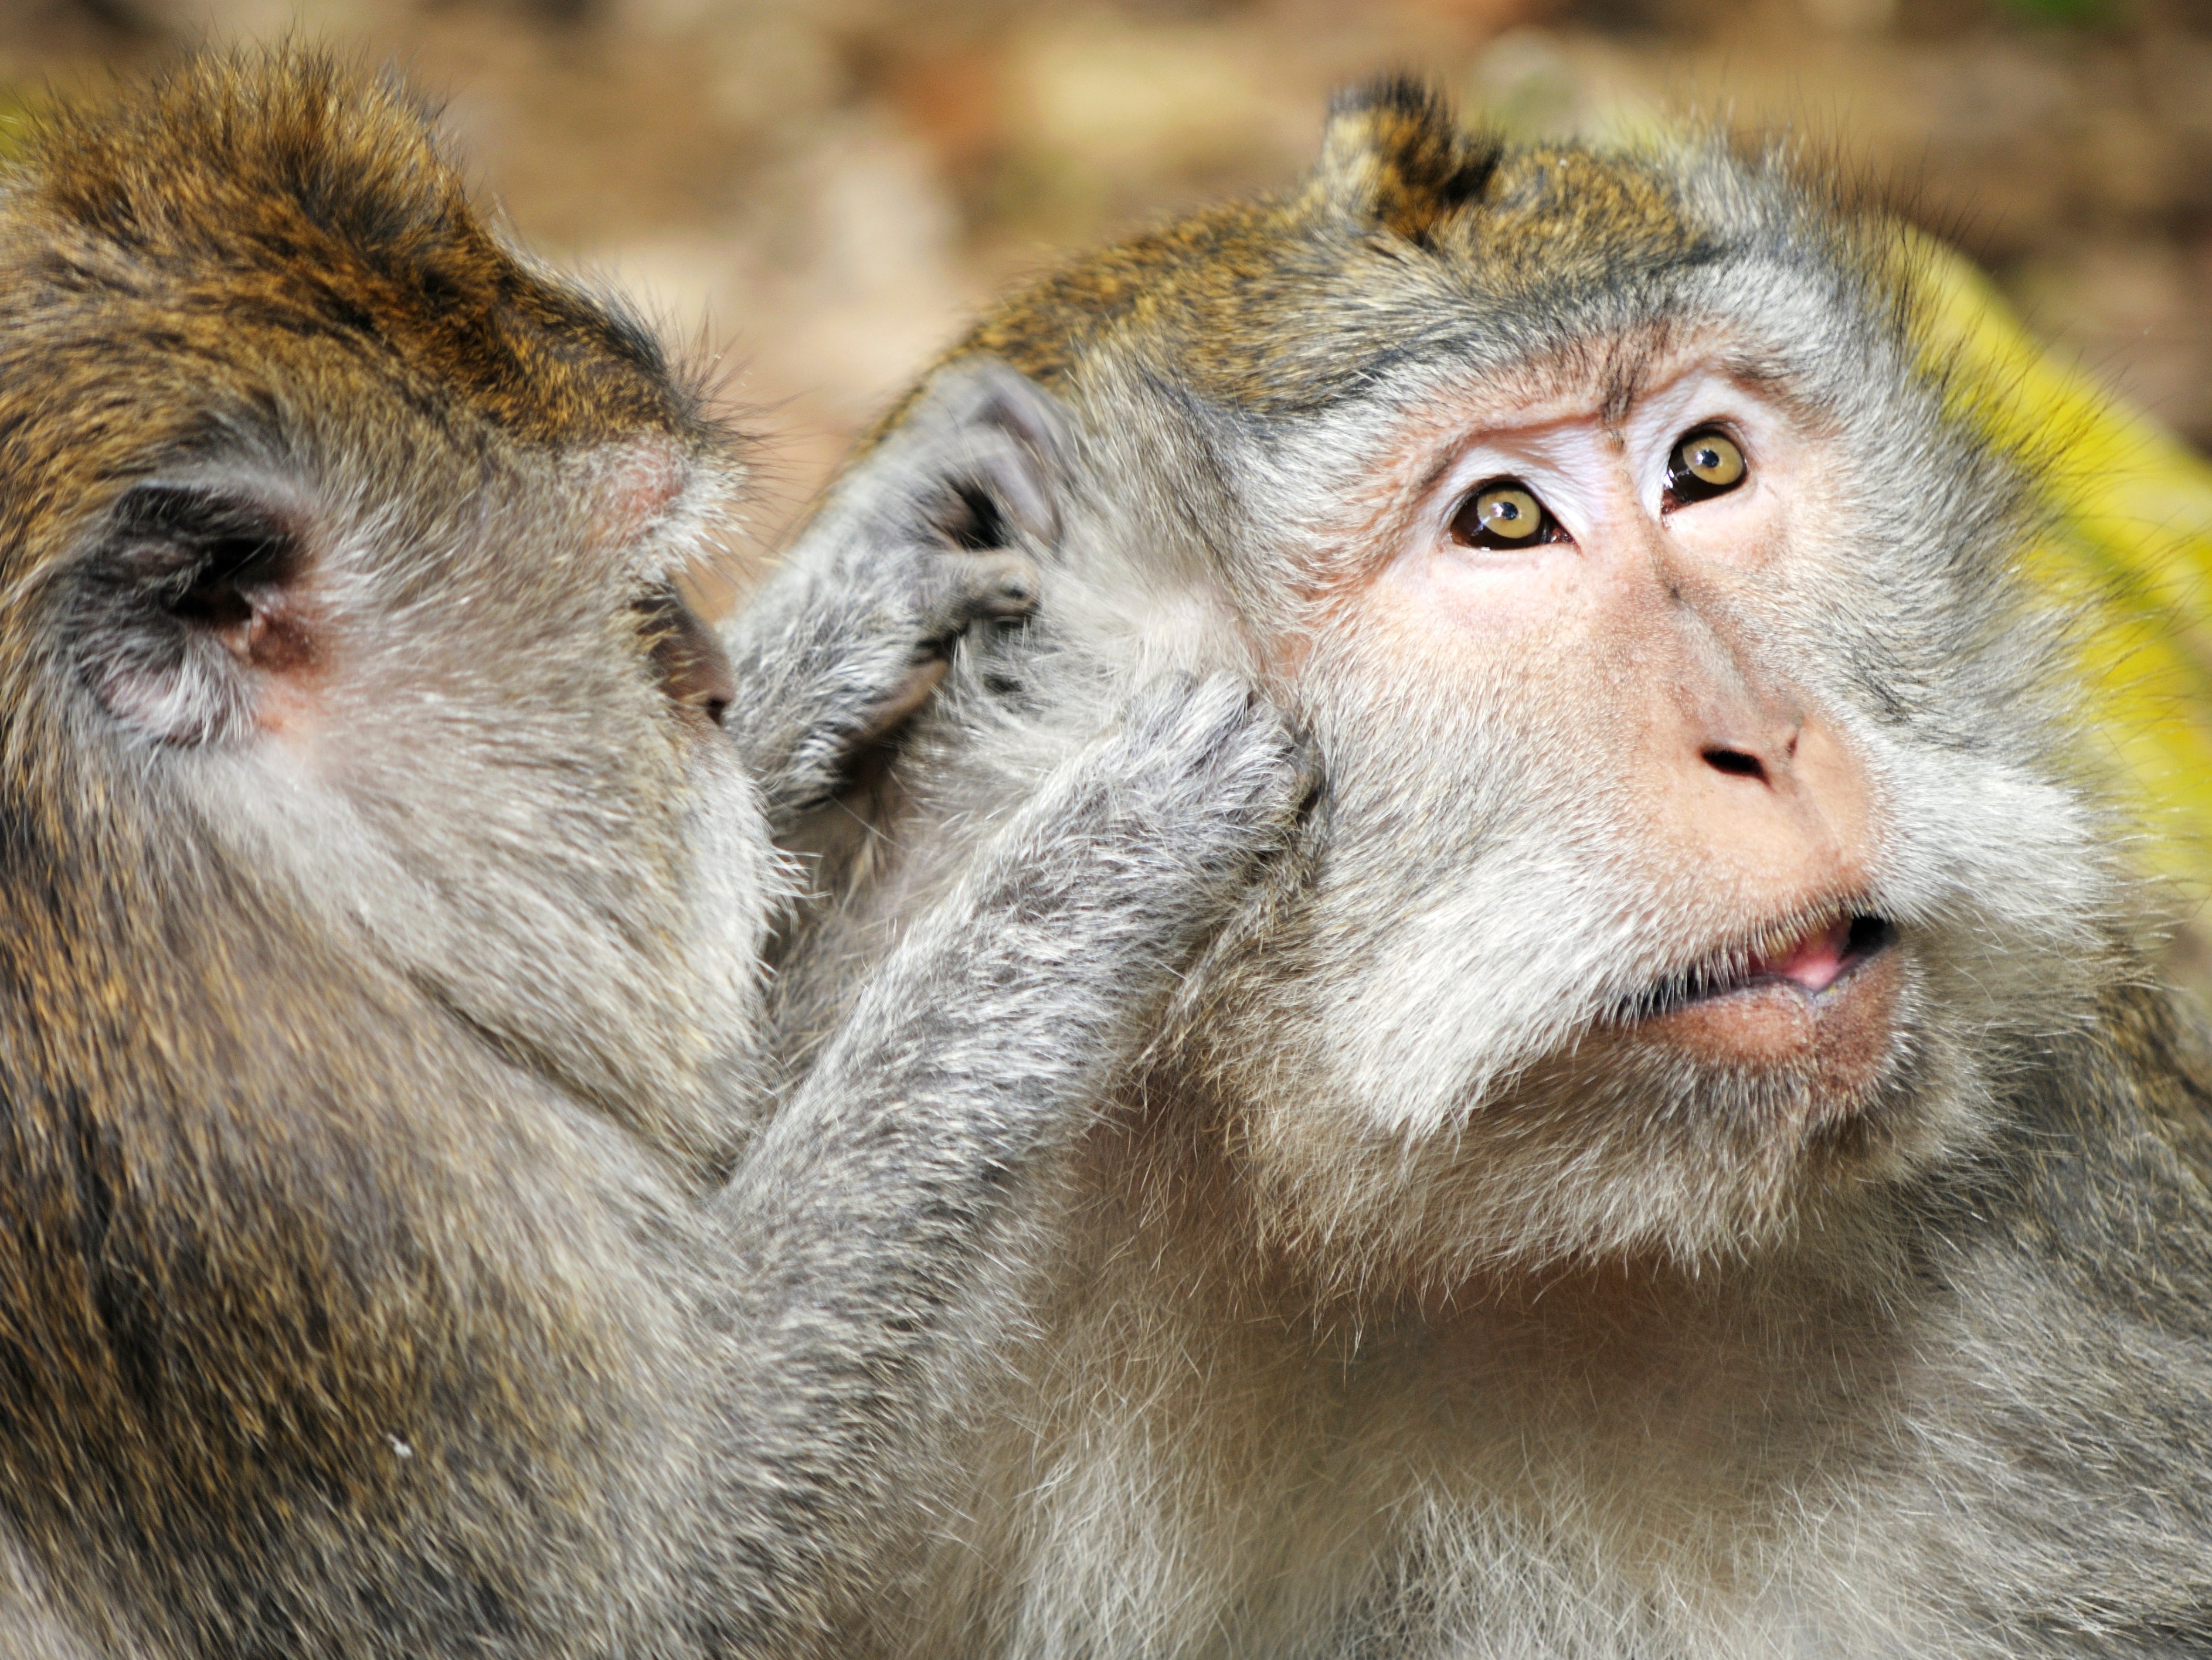 More than 1,140 long-tailed macaques were imported from Mauritius last year for research